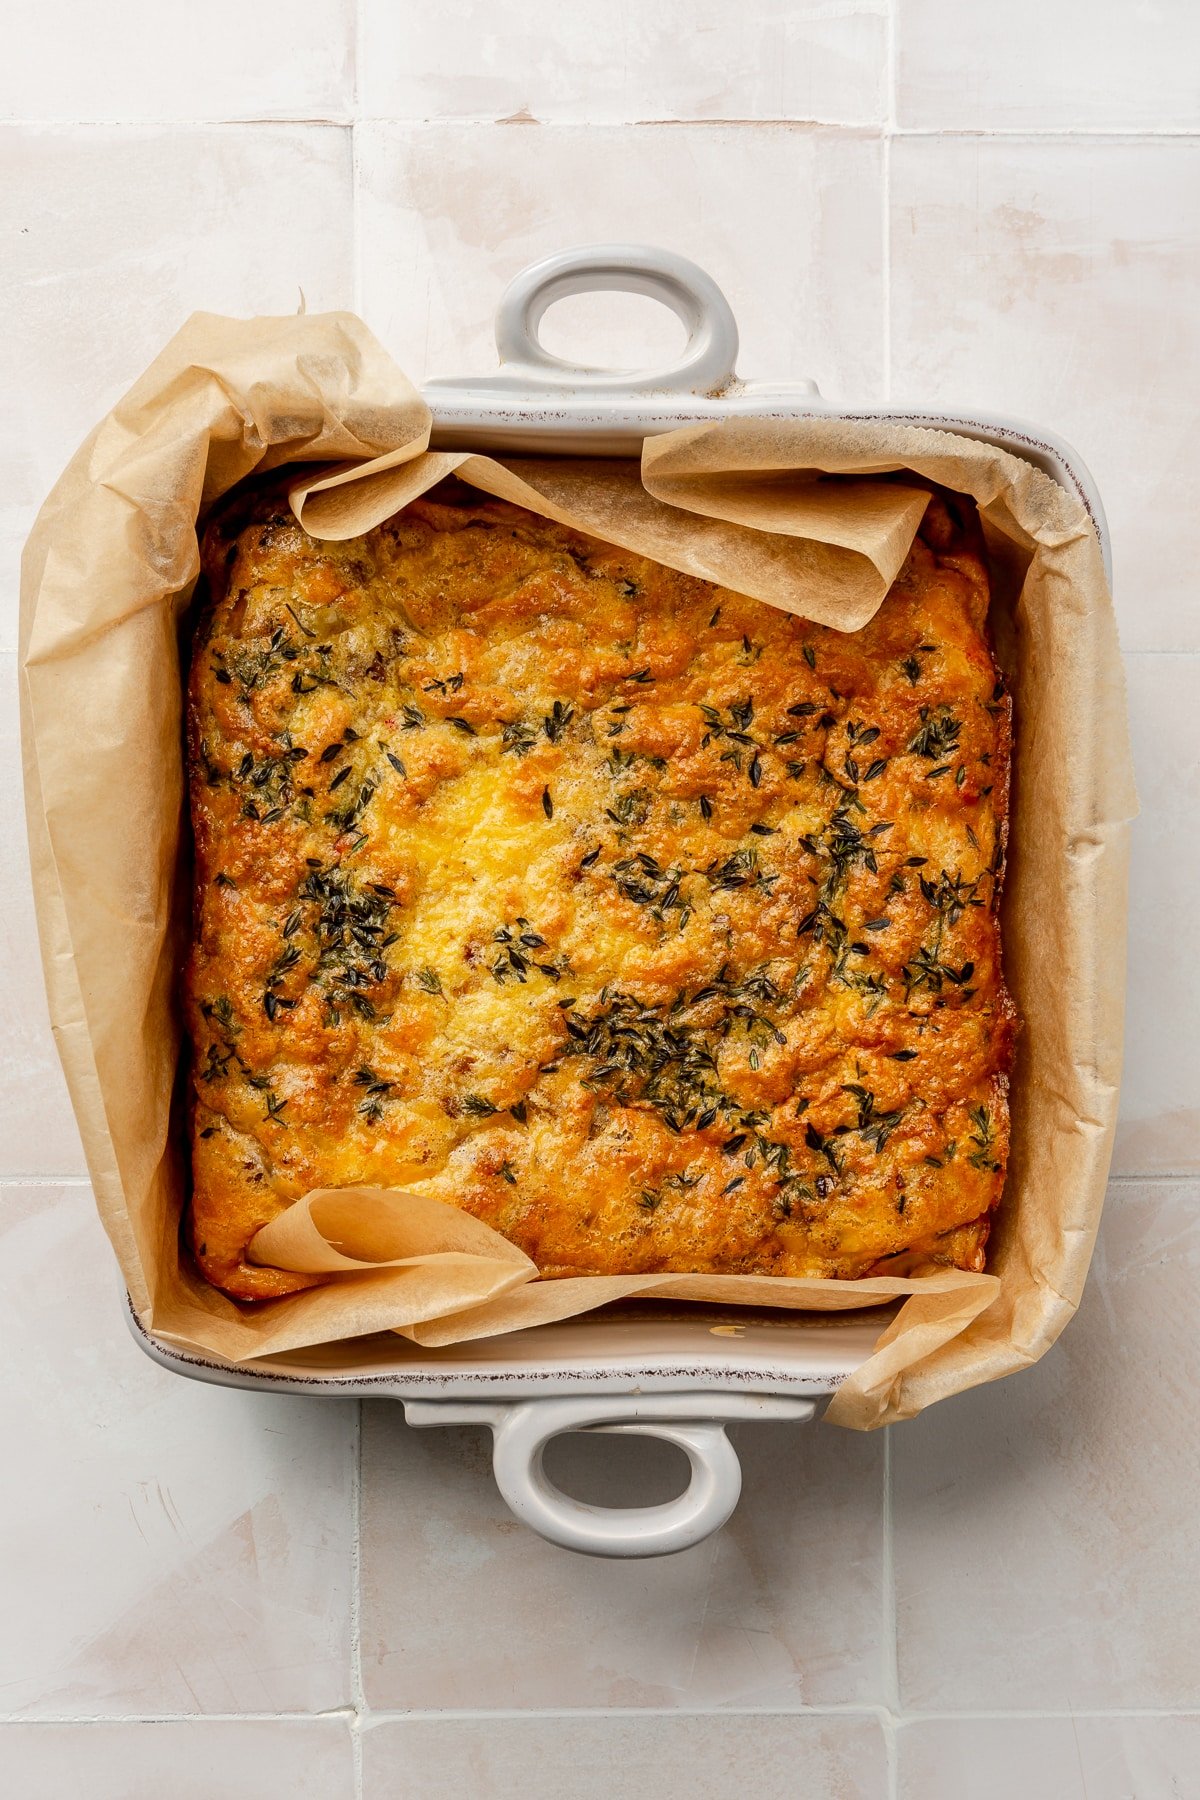 Fully baked crustless quiche Lorraine sits in a parchment lined baking dish.